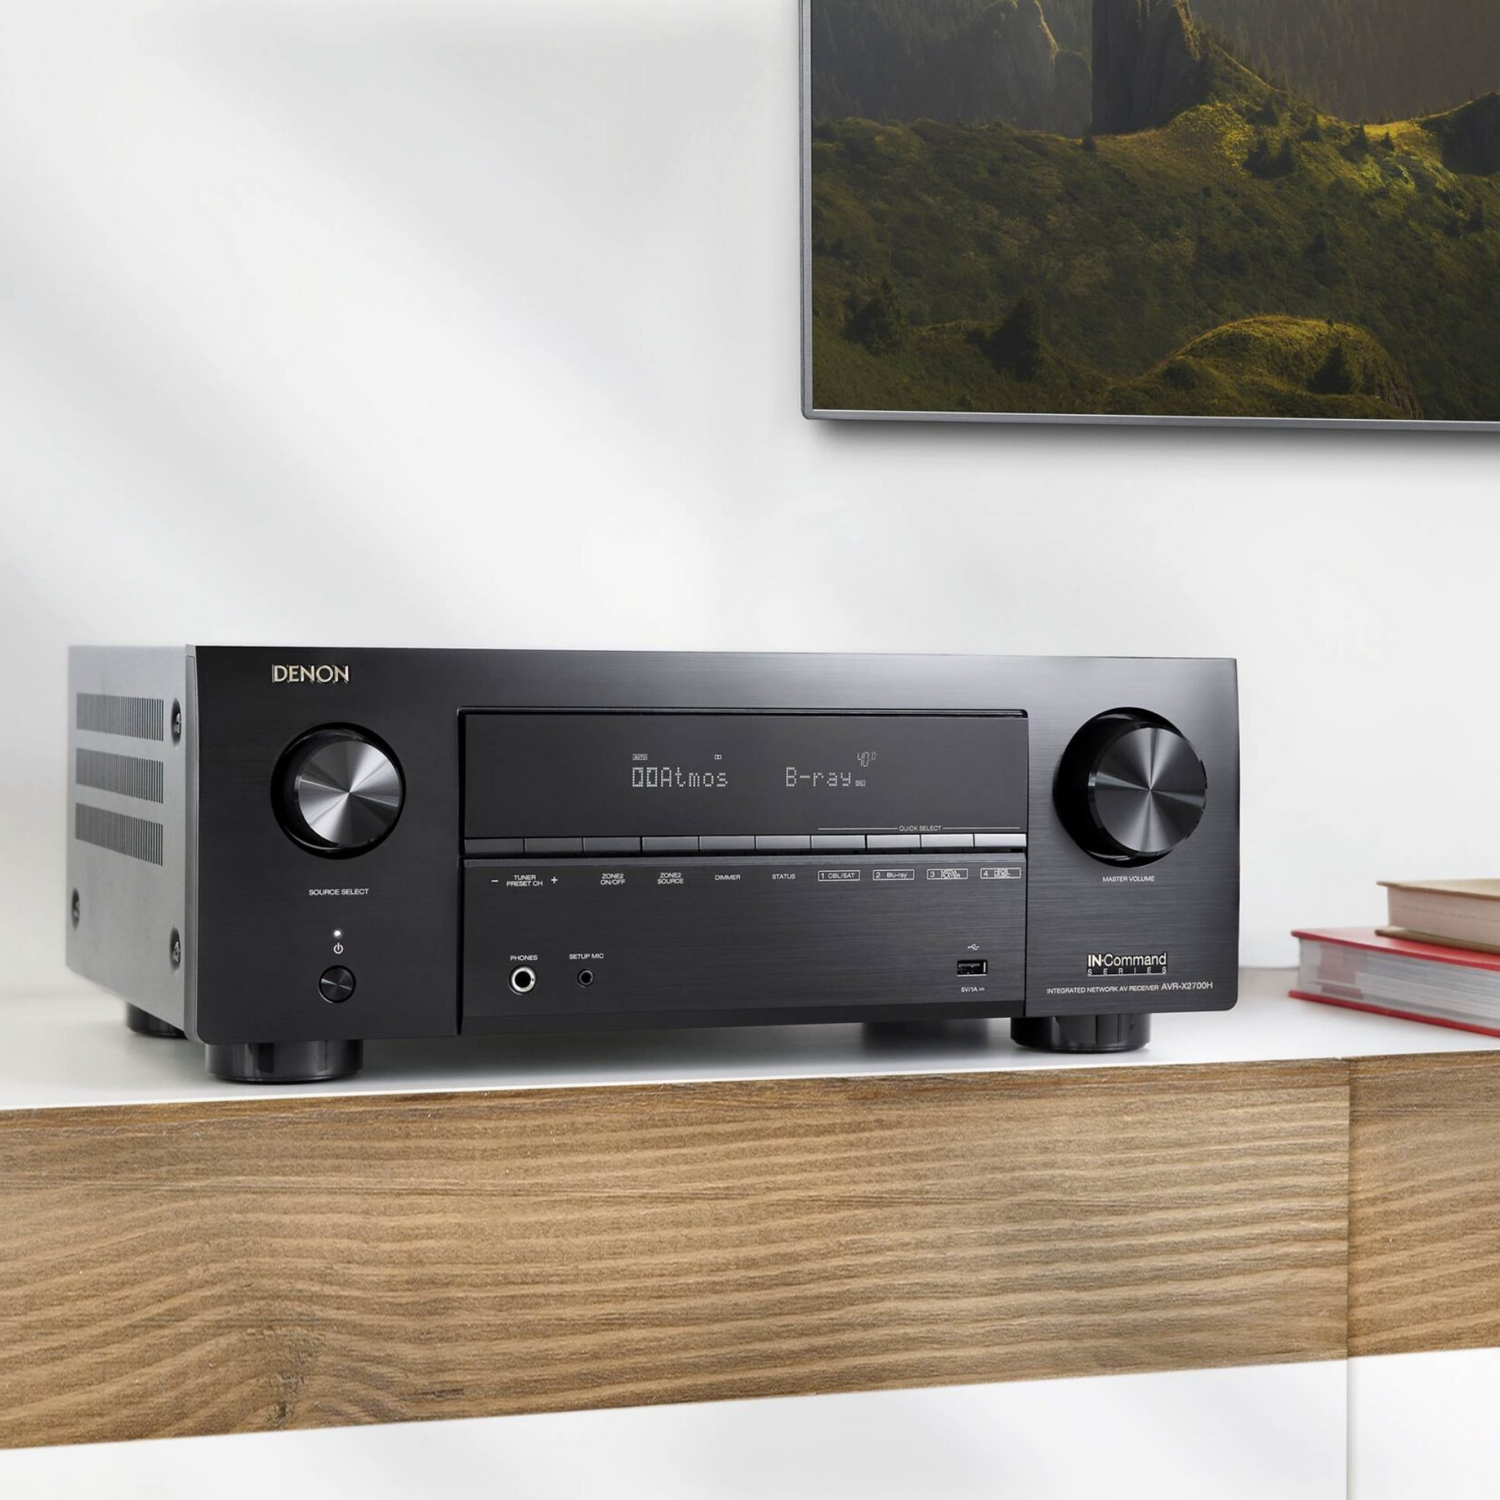 The Different Uses of The AV Receivers That You Should Know About